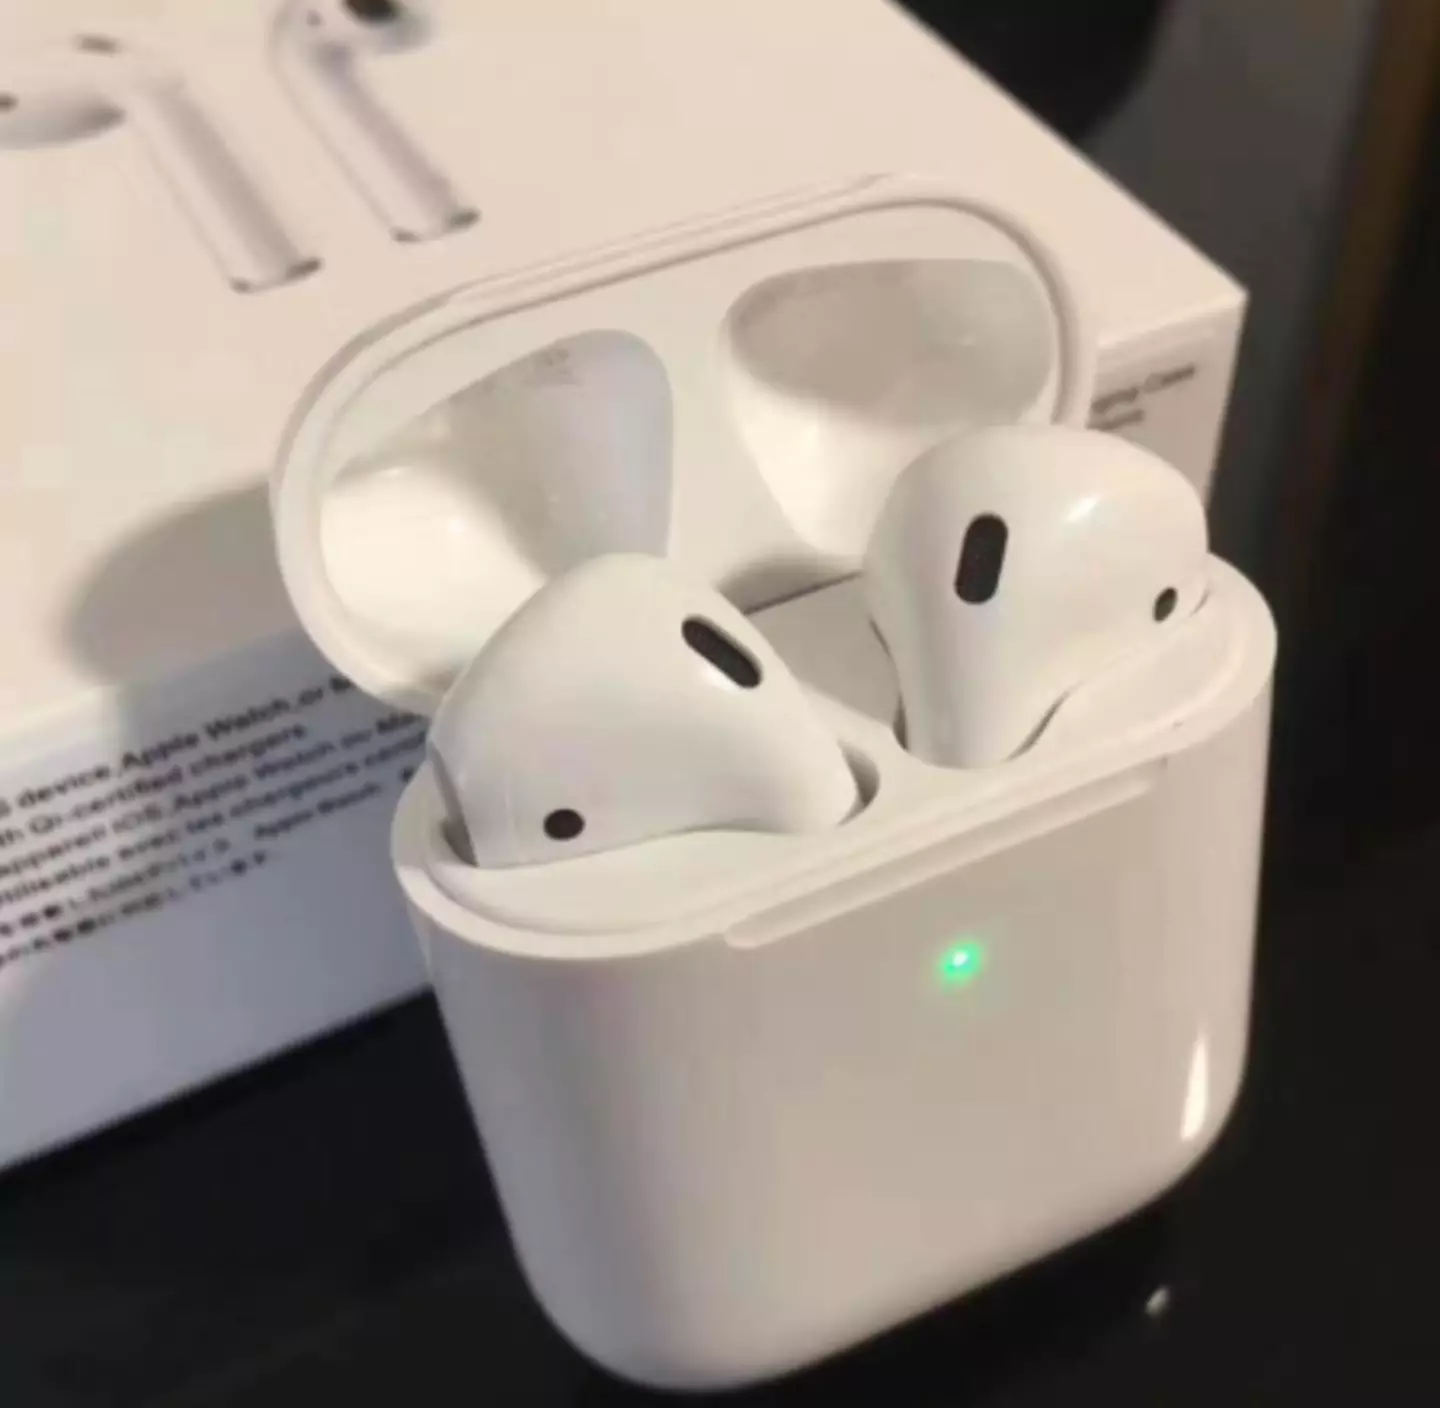 There is a way to stop your AirPods from suffering from excessive battery degradation.